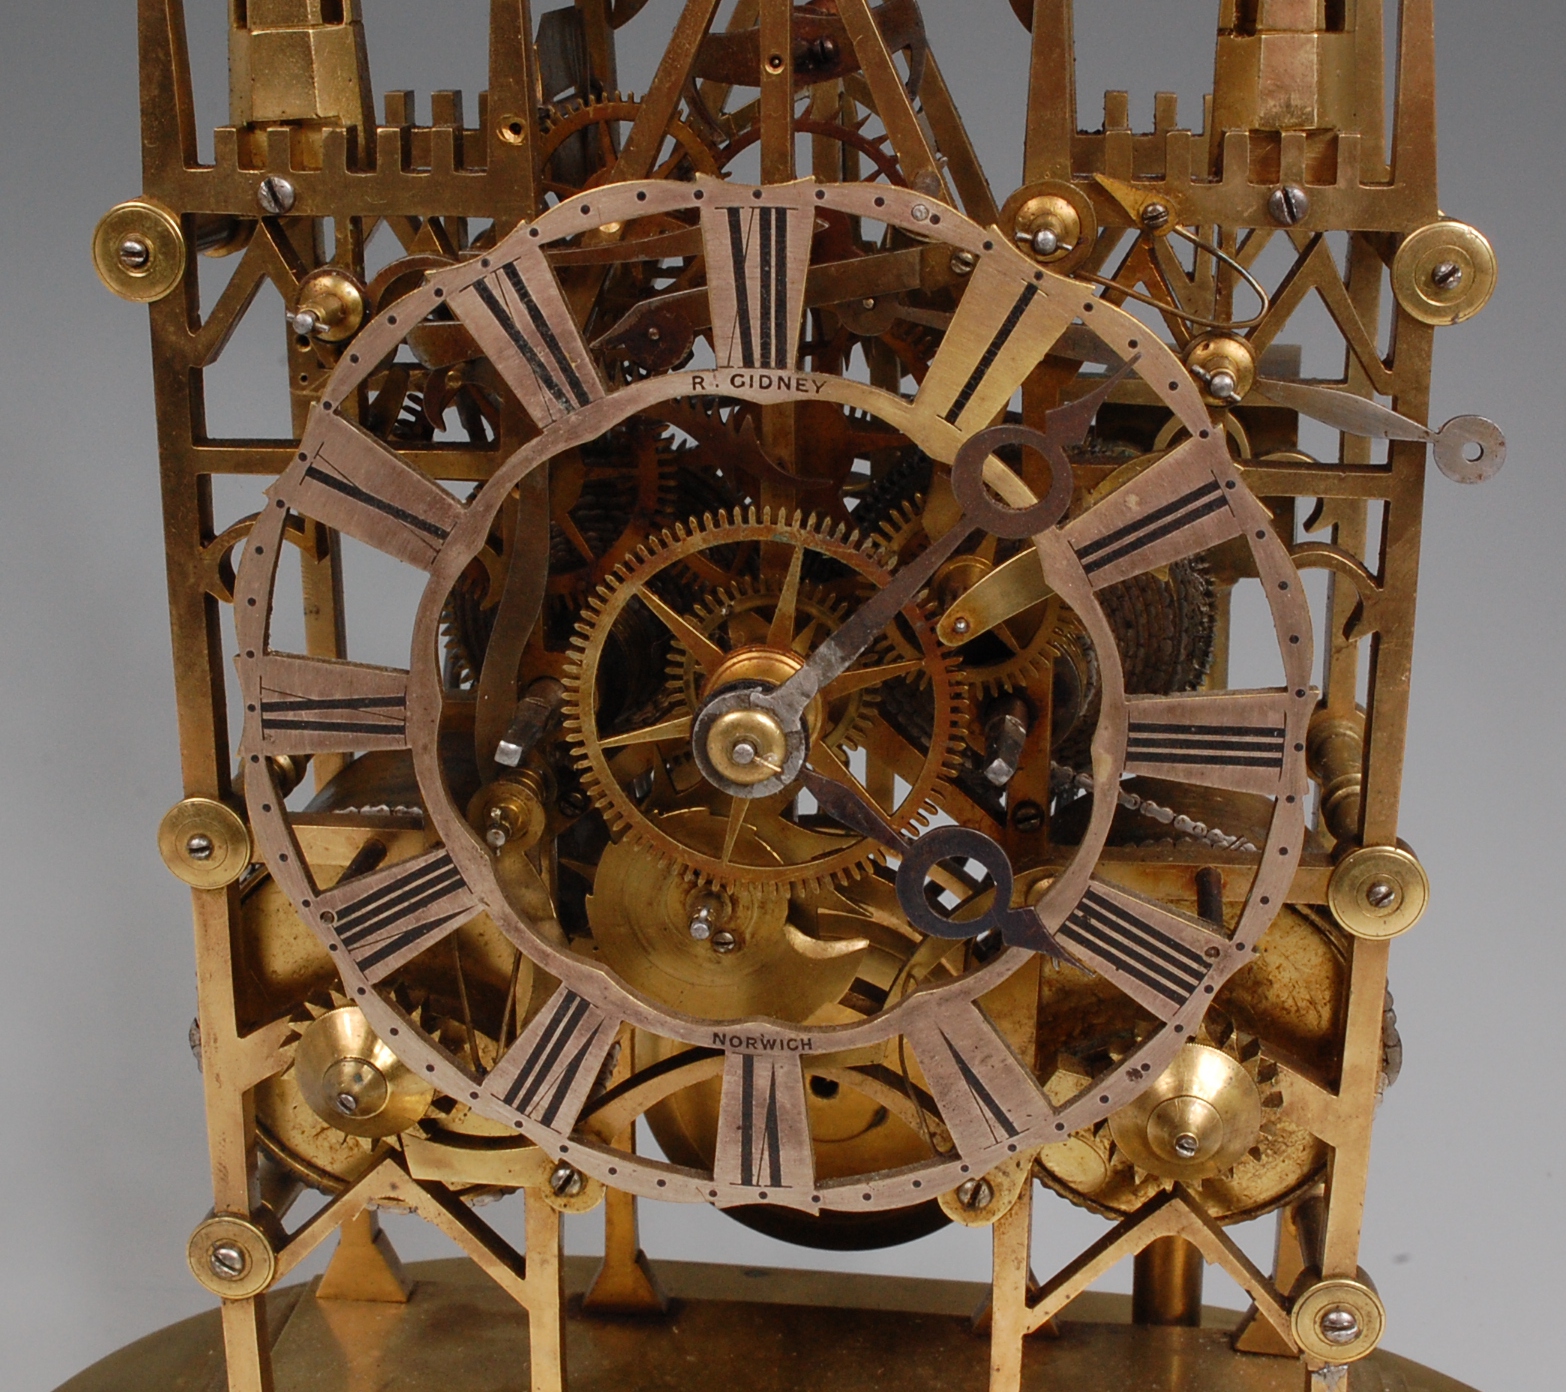 Robert Gidney of Norwich circa 1830 brass cathedral skeleton clock, having signed silvered dial, - Image 2 of 4